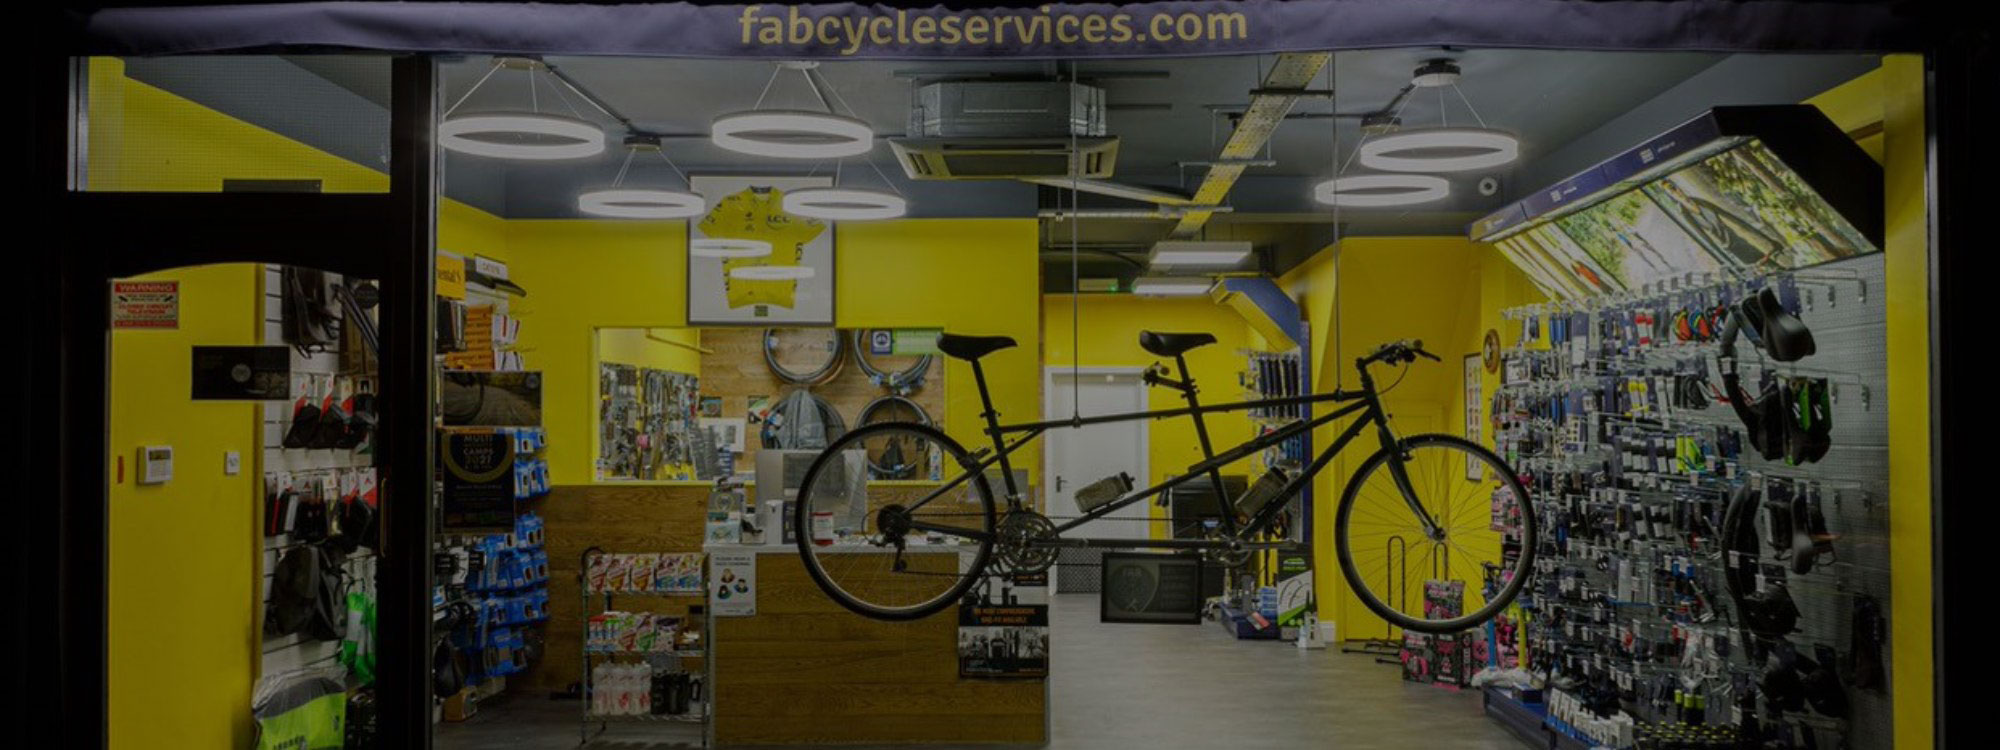 Repairs - Covers all aspects of bicycle maintenance from puncture repairs to disc brake fluid replacement and everything in between.